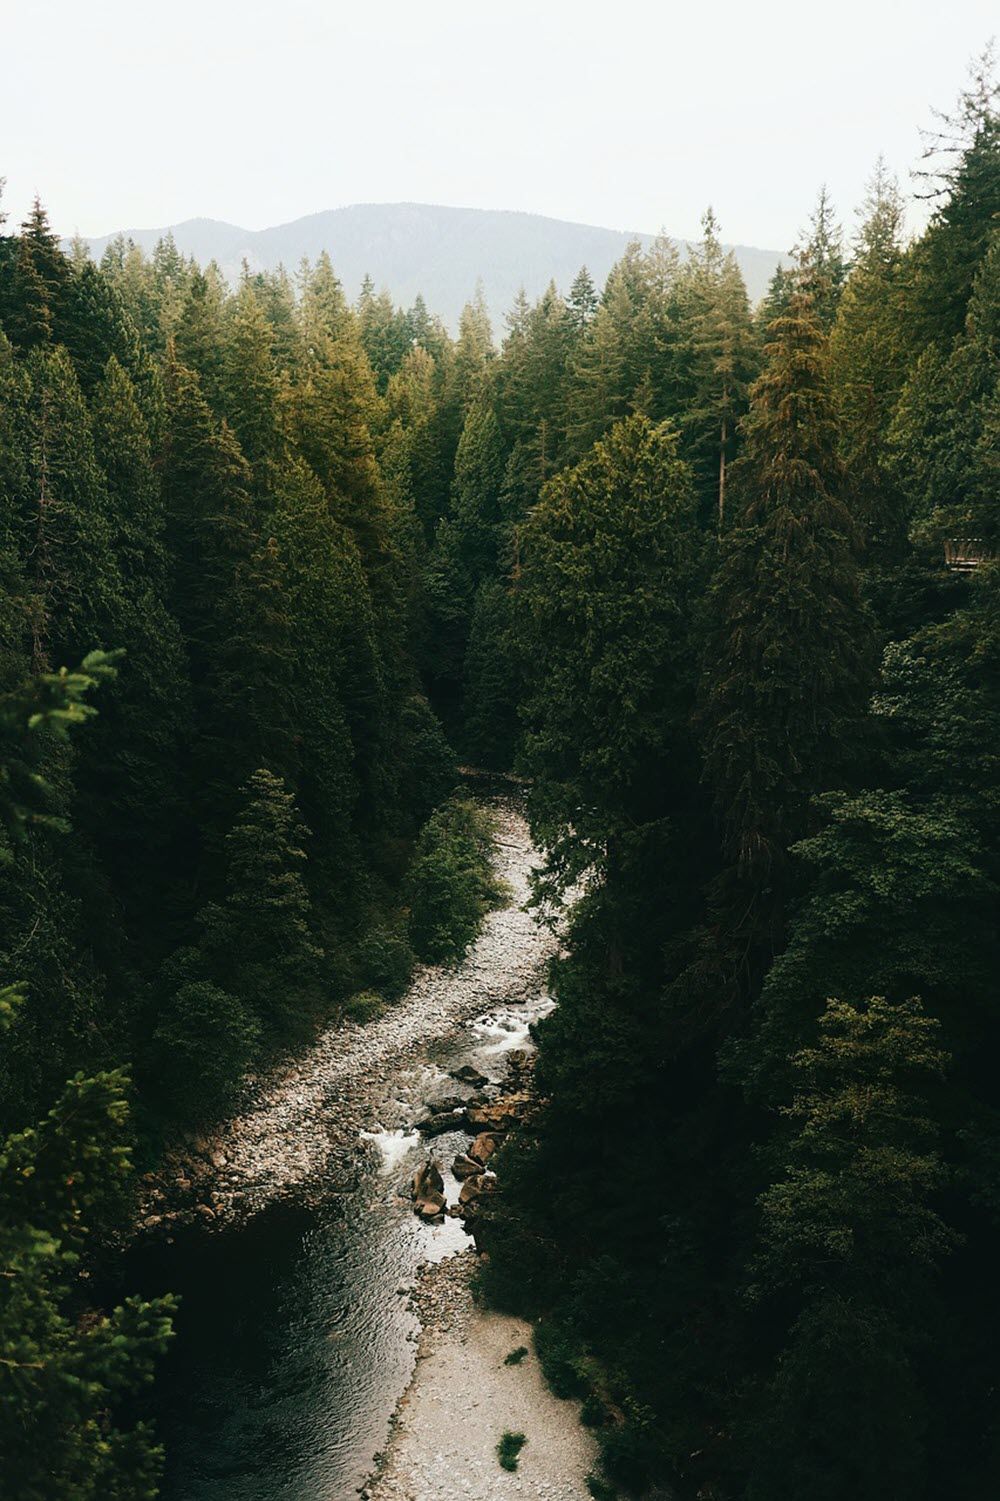 Forest wallpaper for your Mobile (HD, FHD, 2K, 4K)